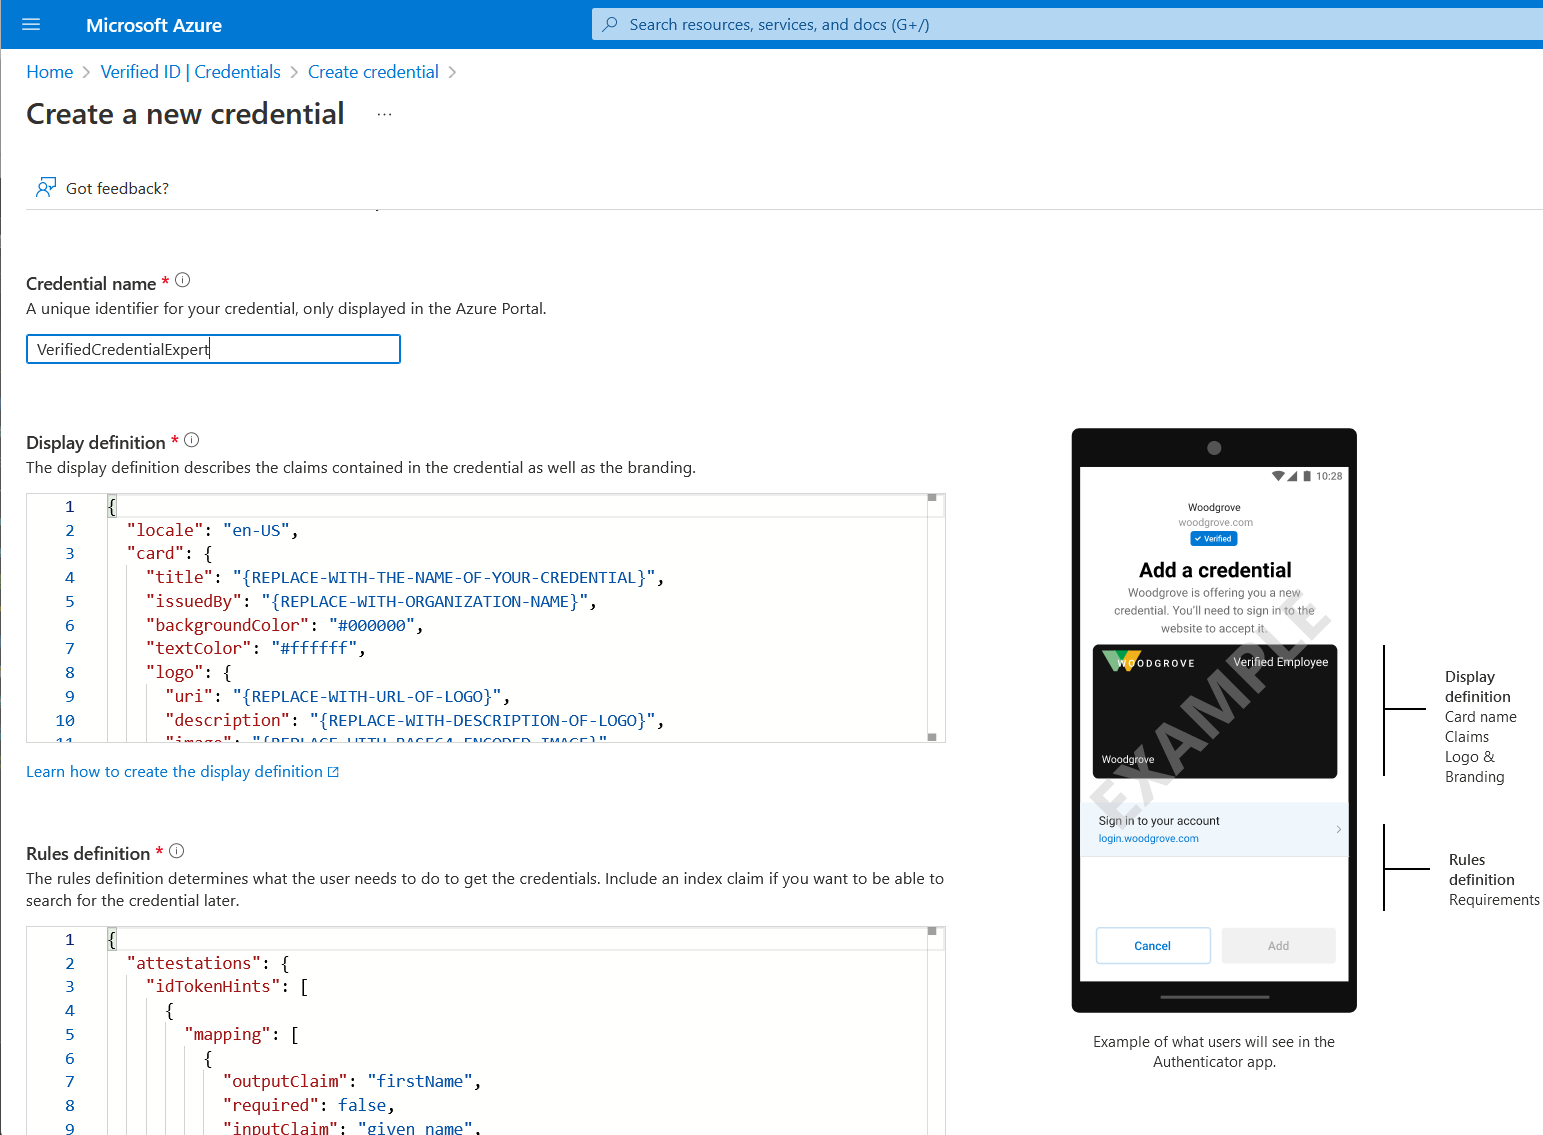 Screenshot of the 'Create a new credential' page, displaying JSON samples for the display and rules files.